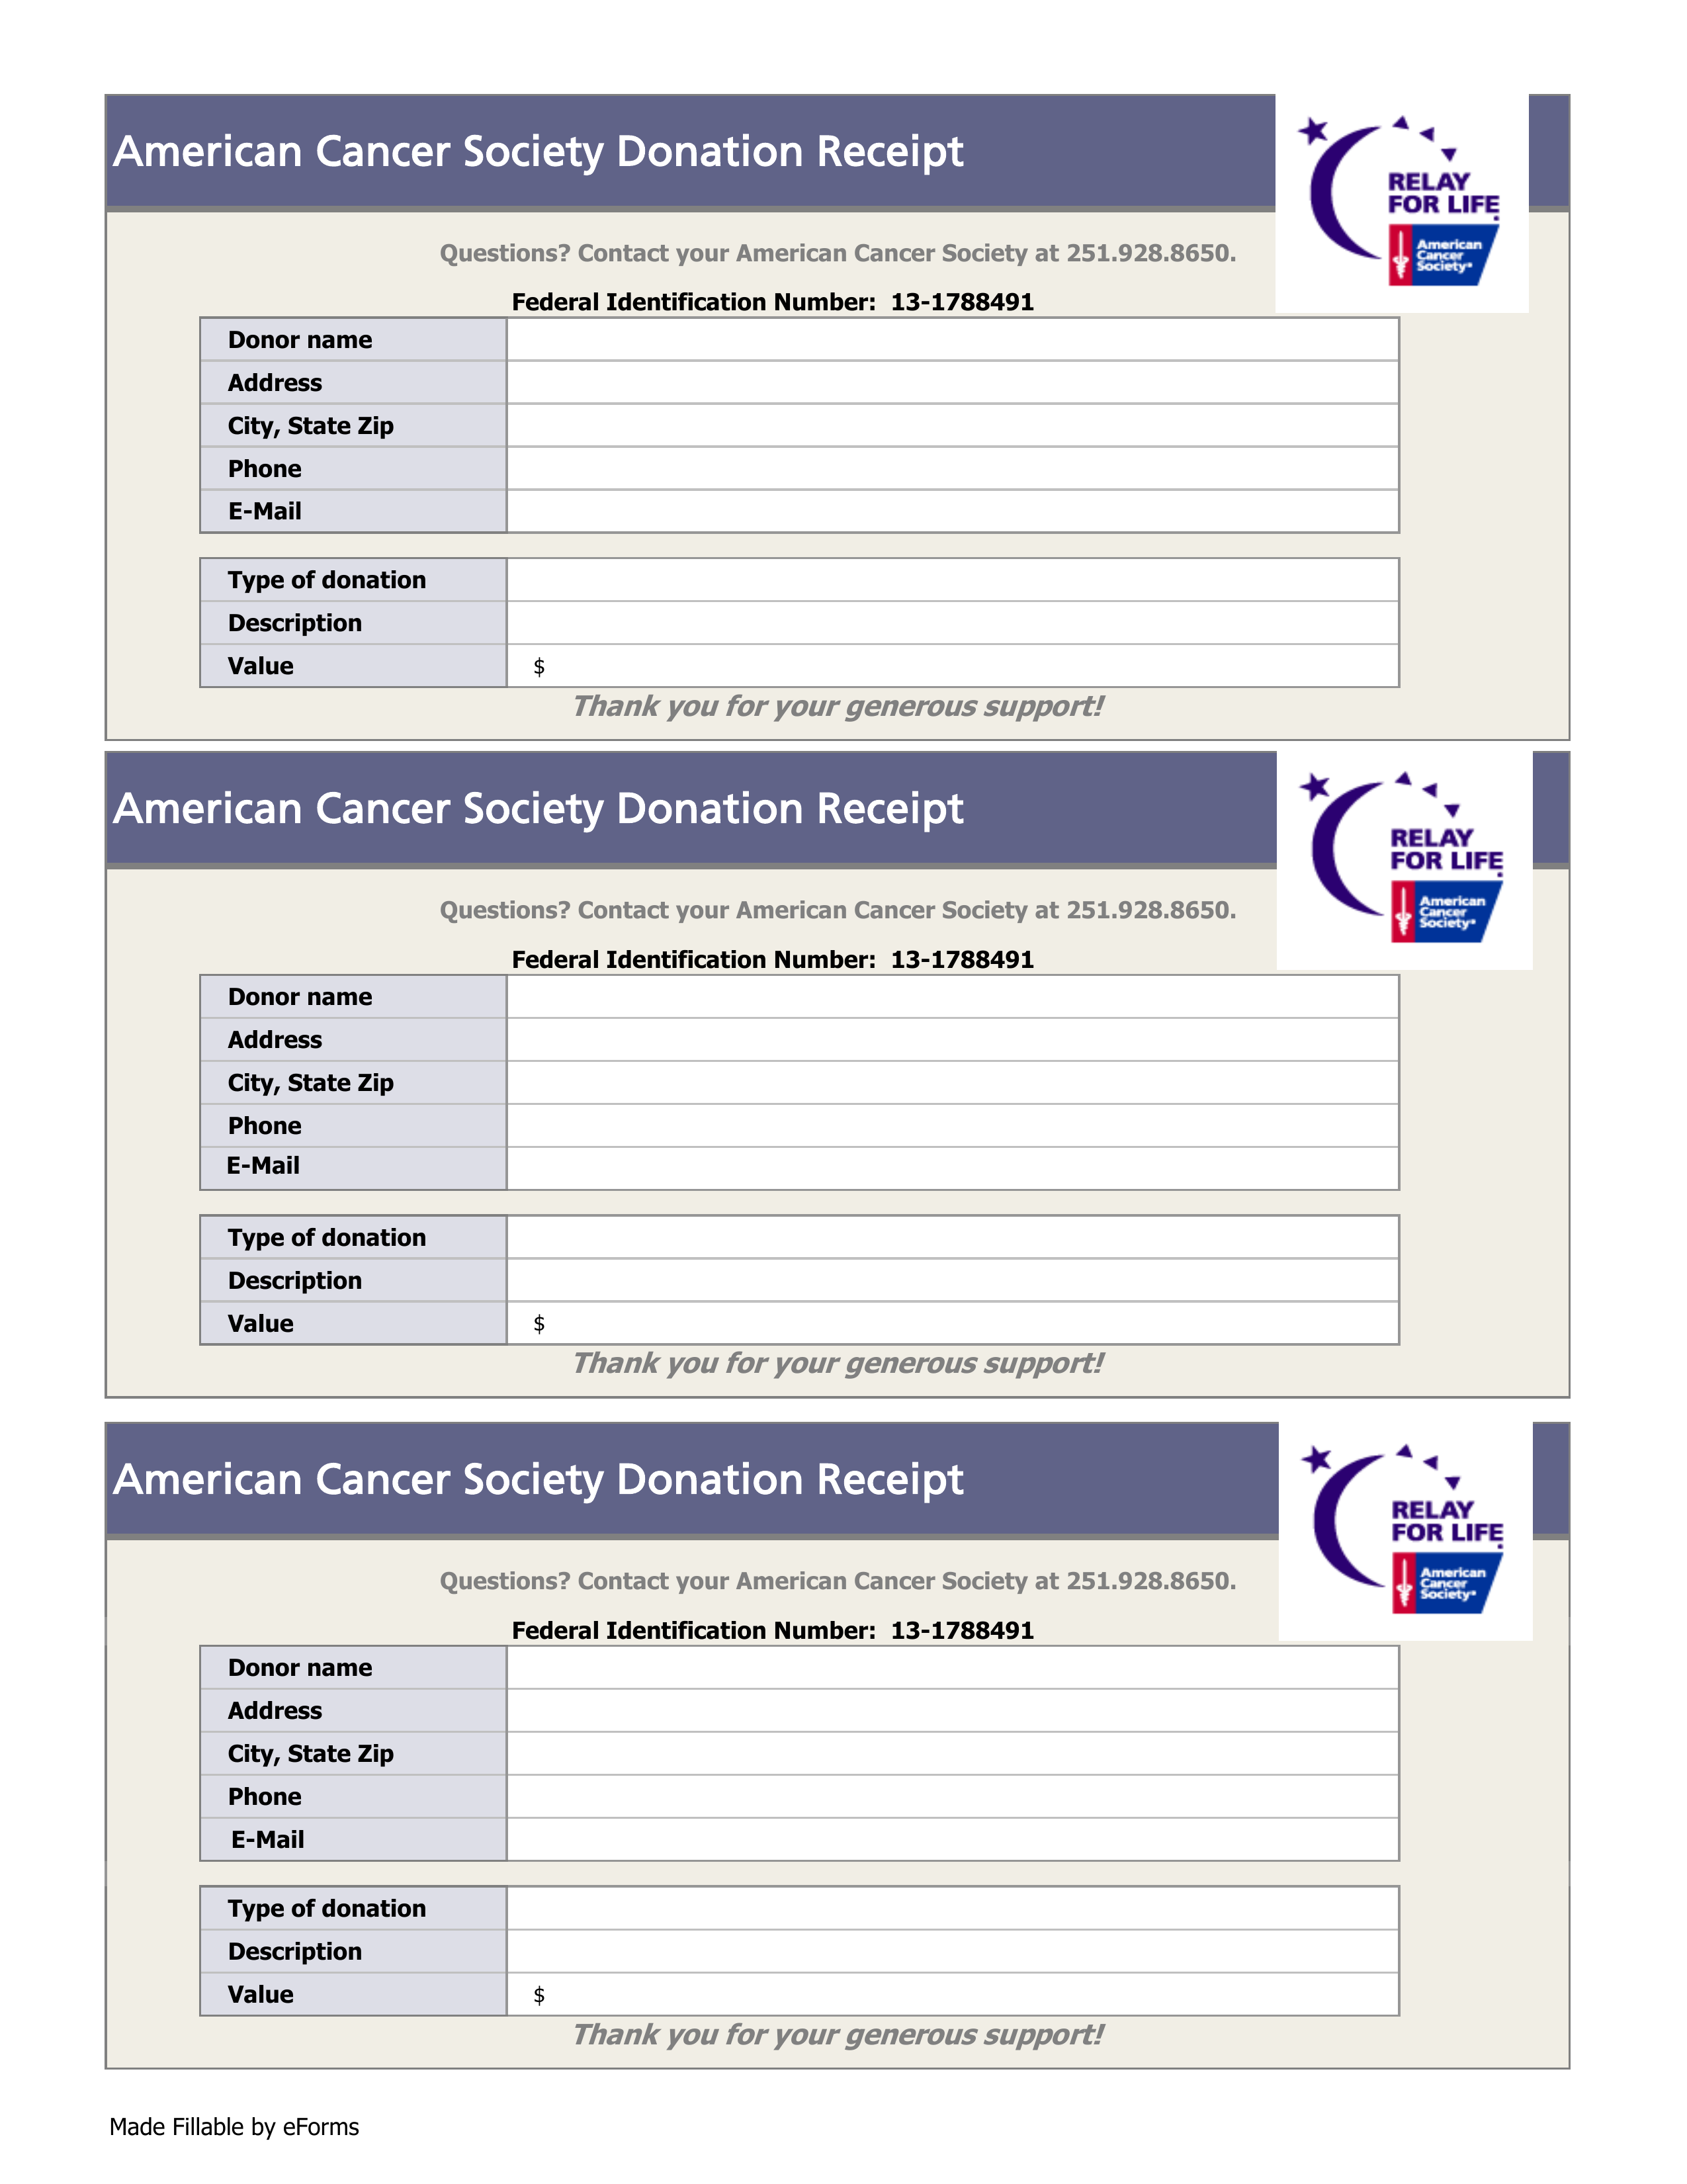 American Cancer Society Donation Receipt Template